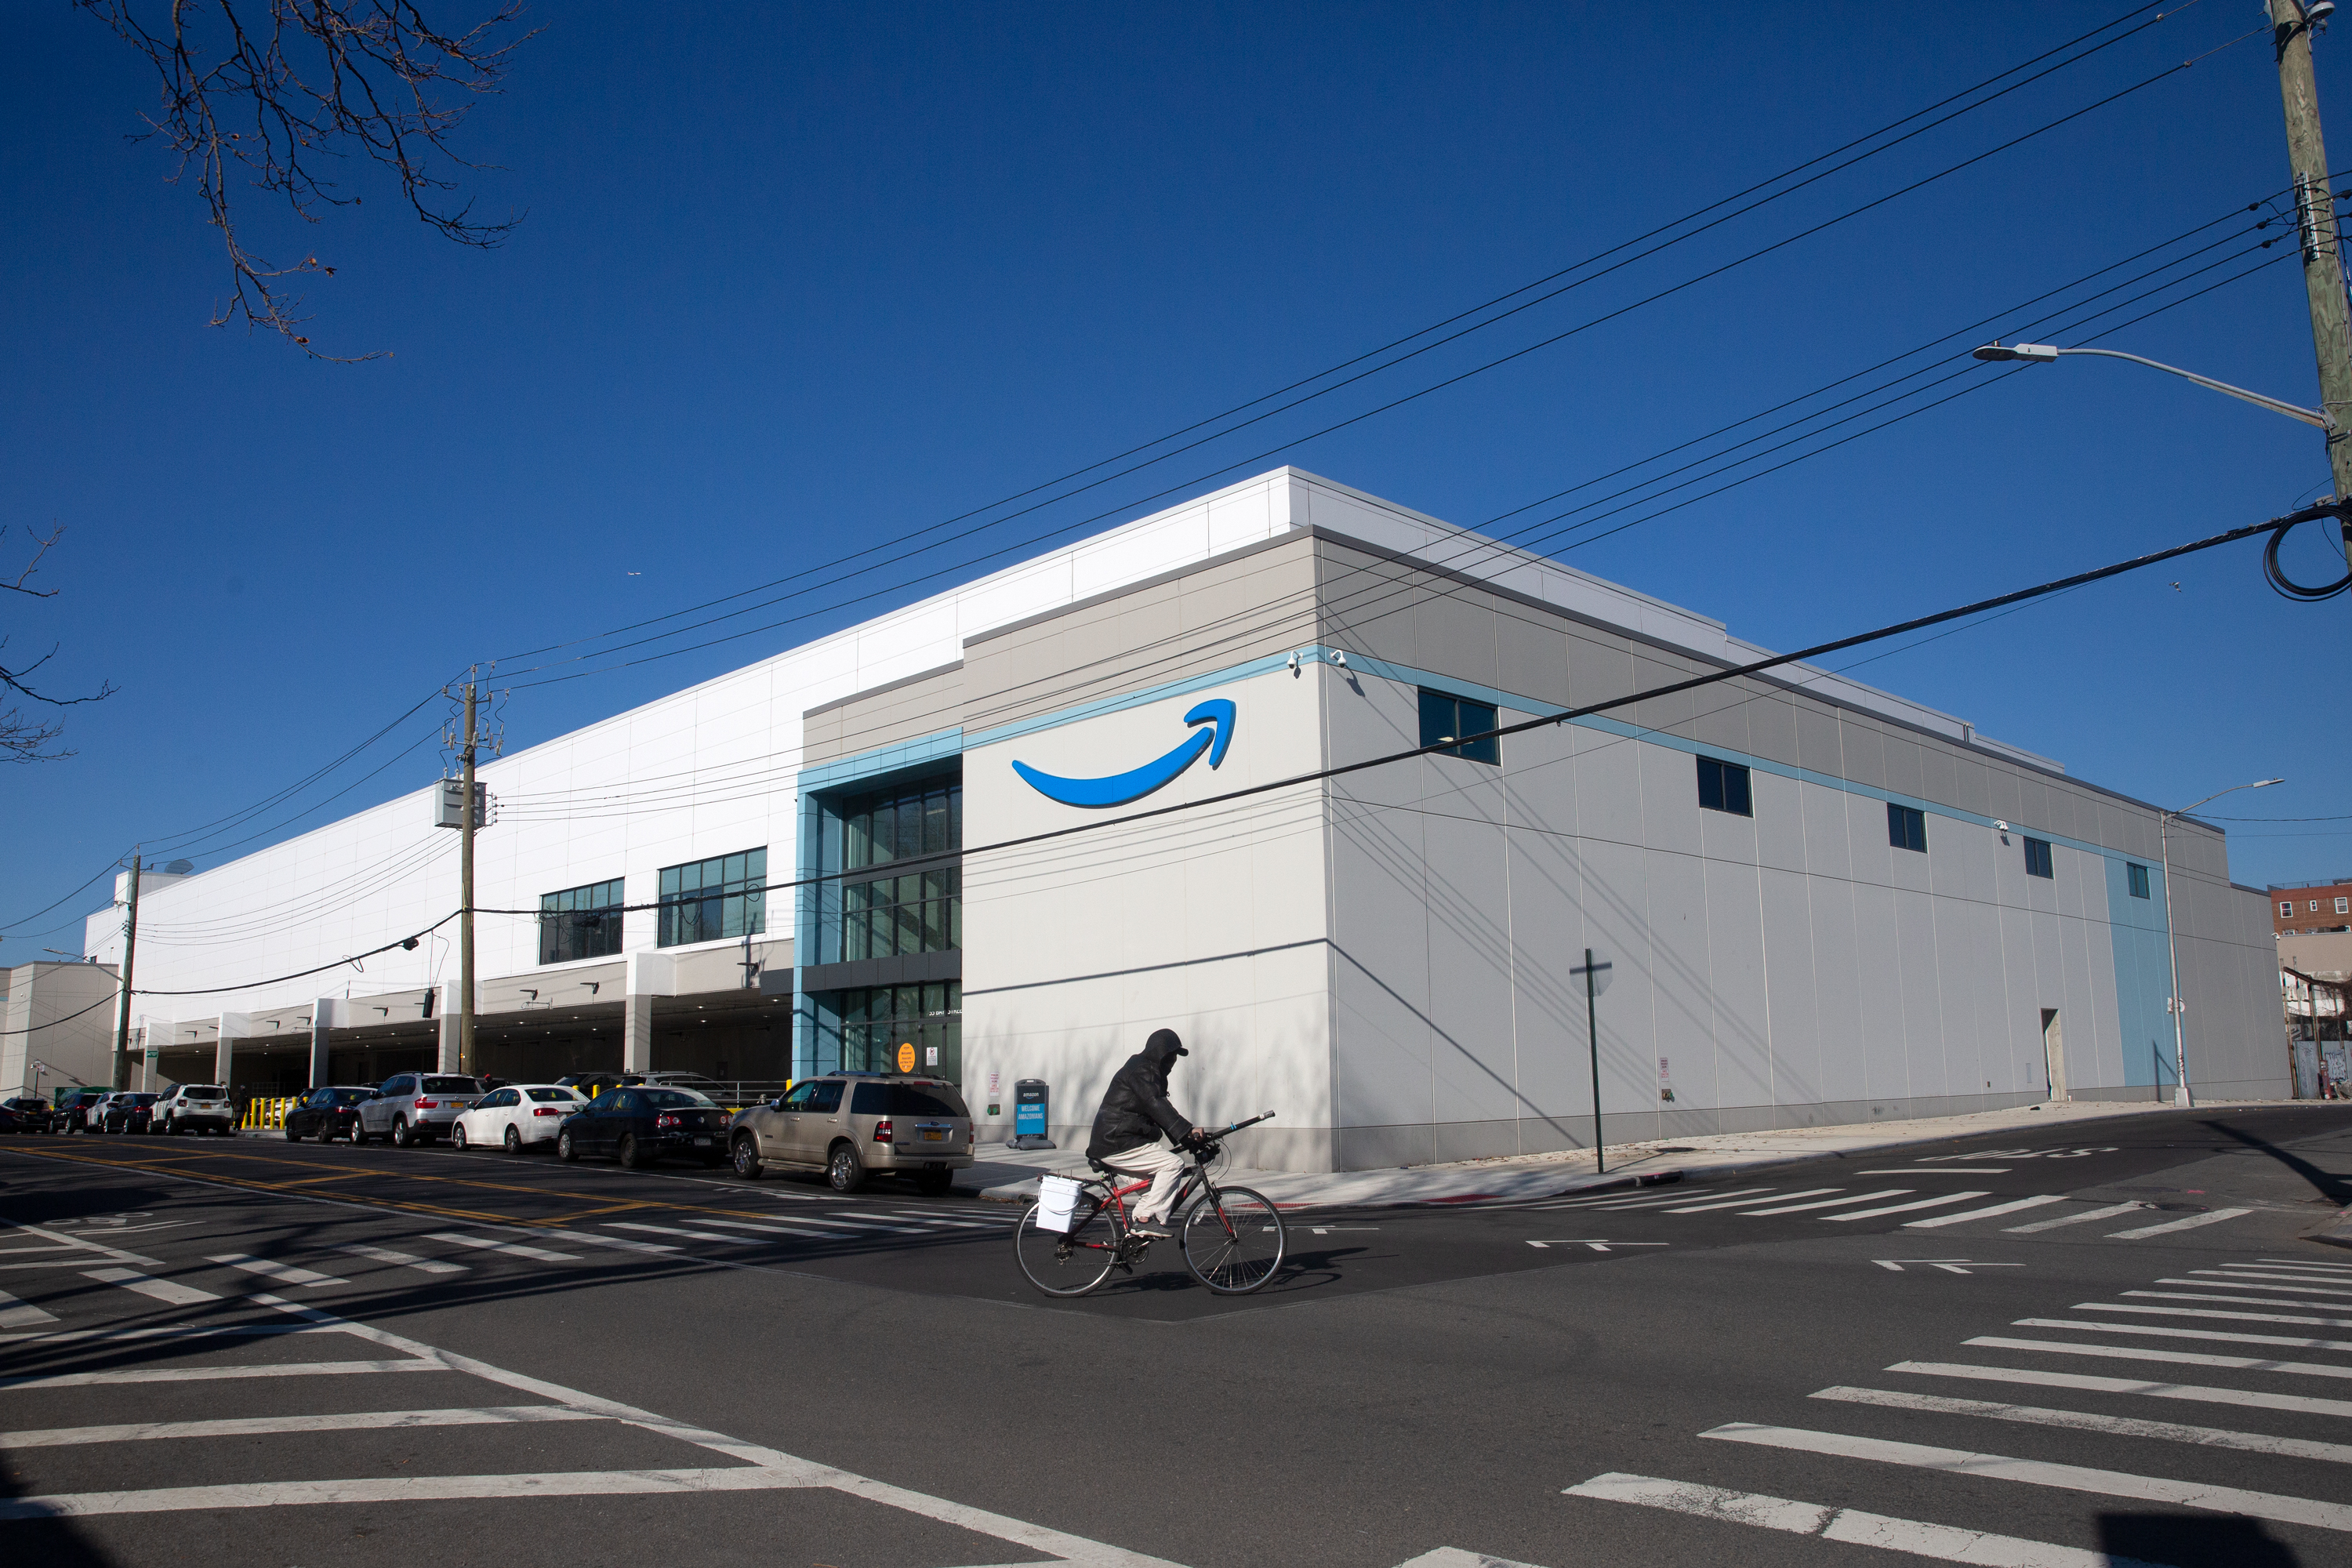 Amazon had a fulfillment along Bay Street in Red Hook, Dec. 13, 2021.